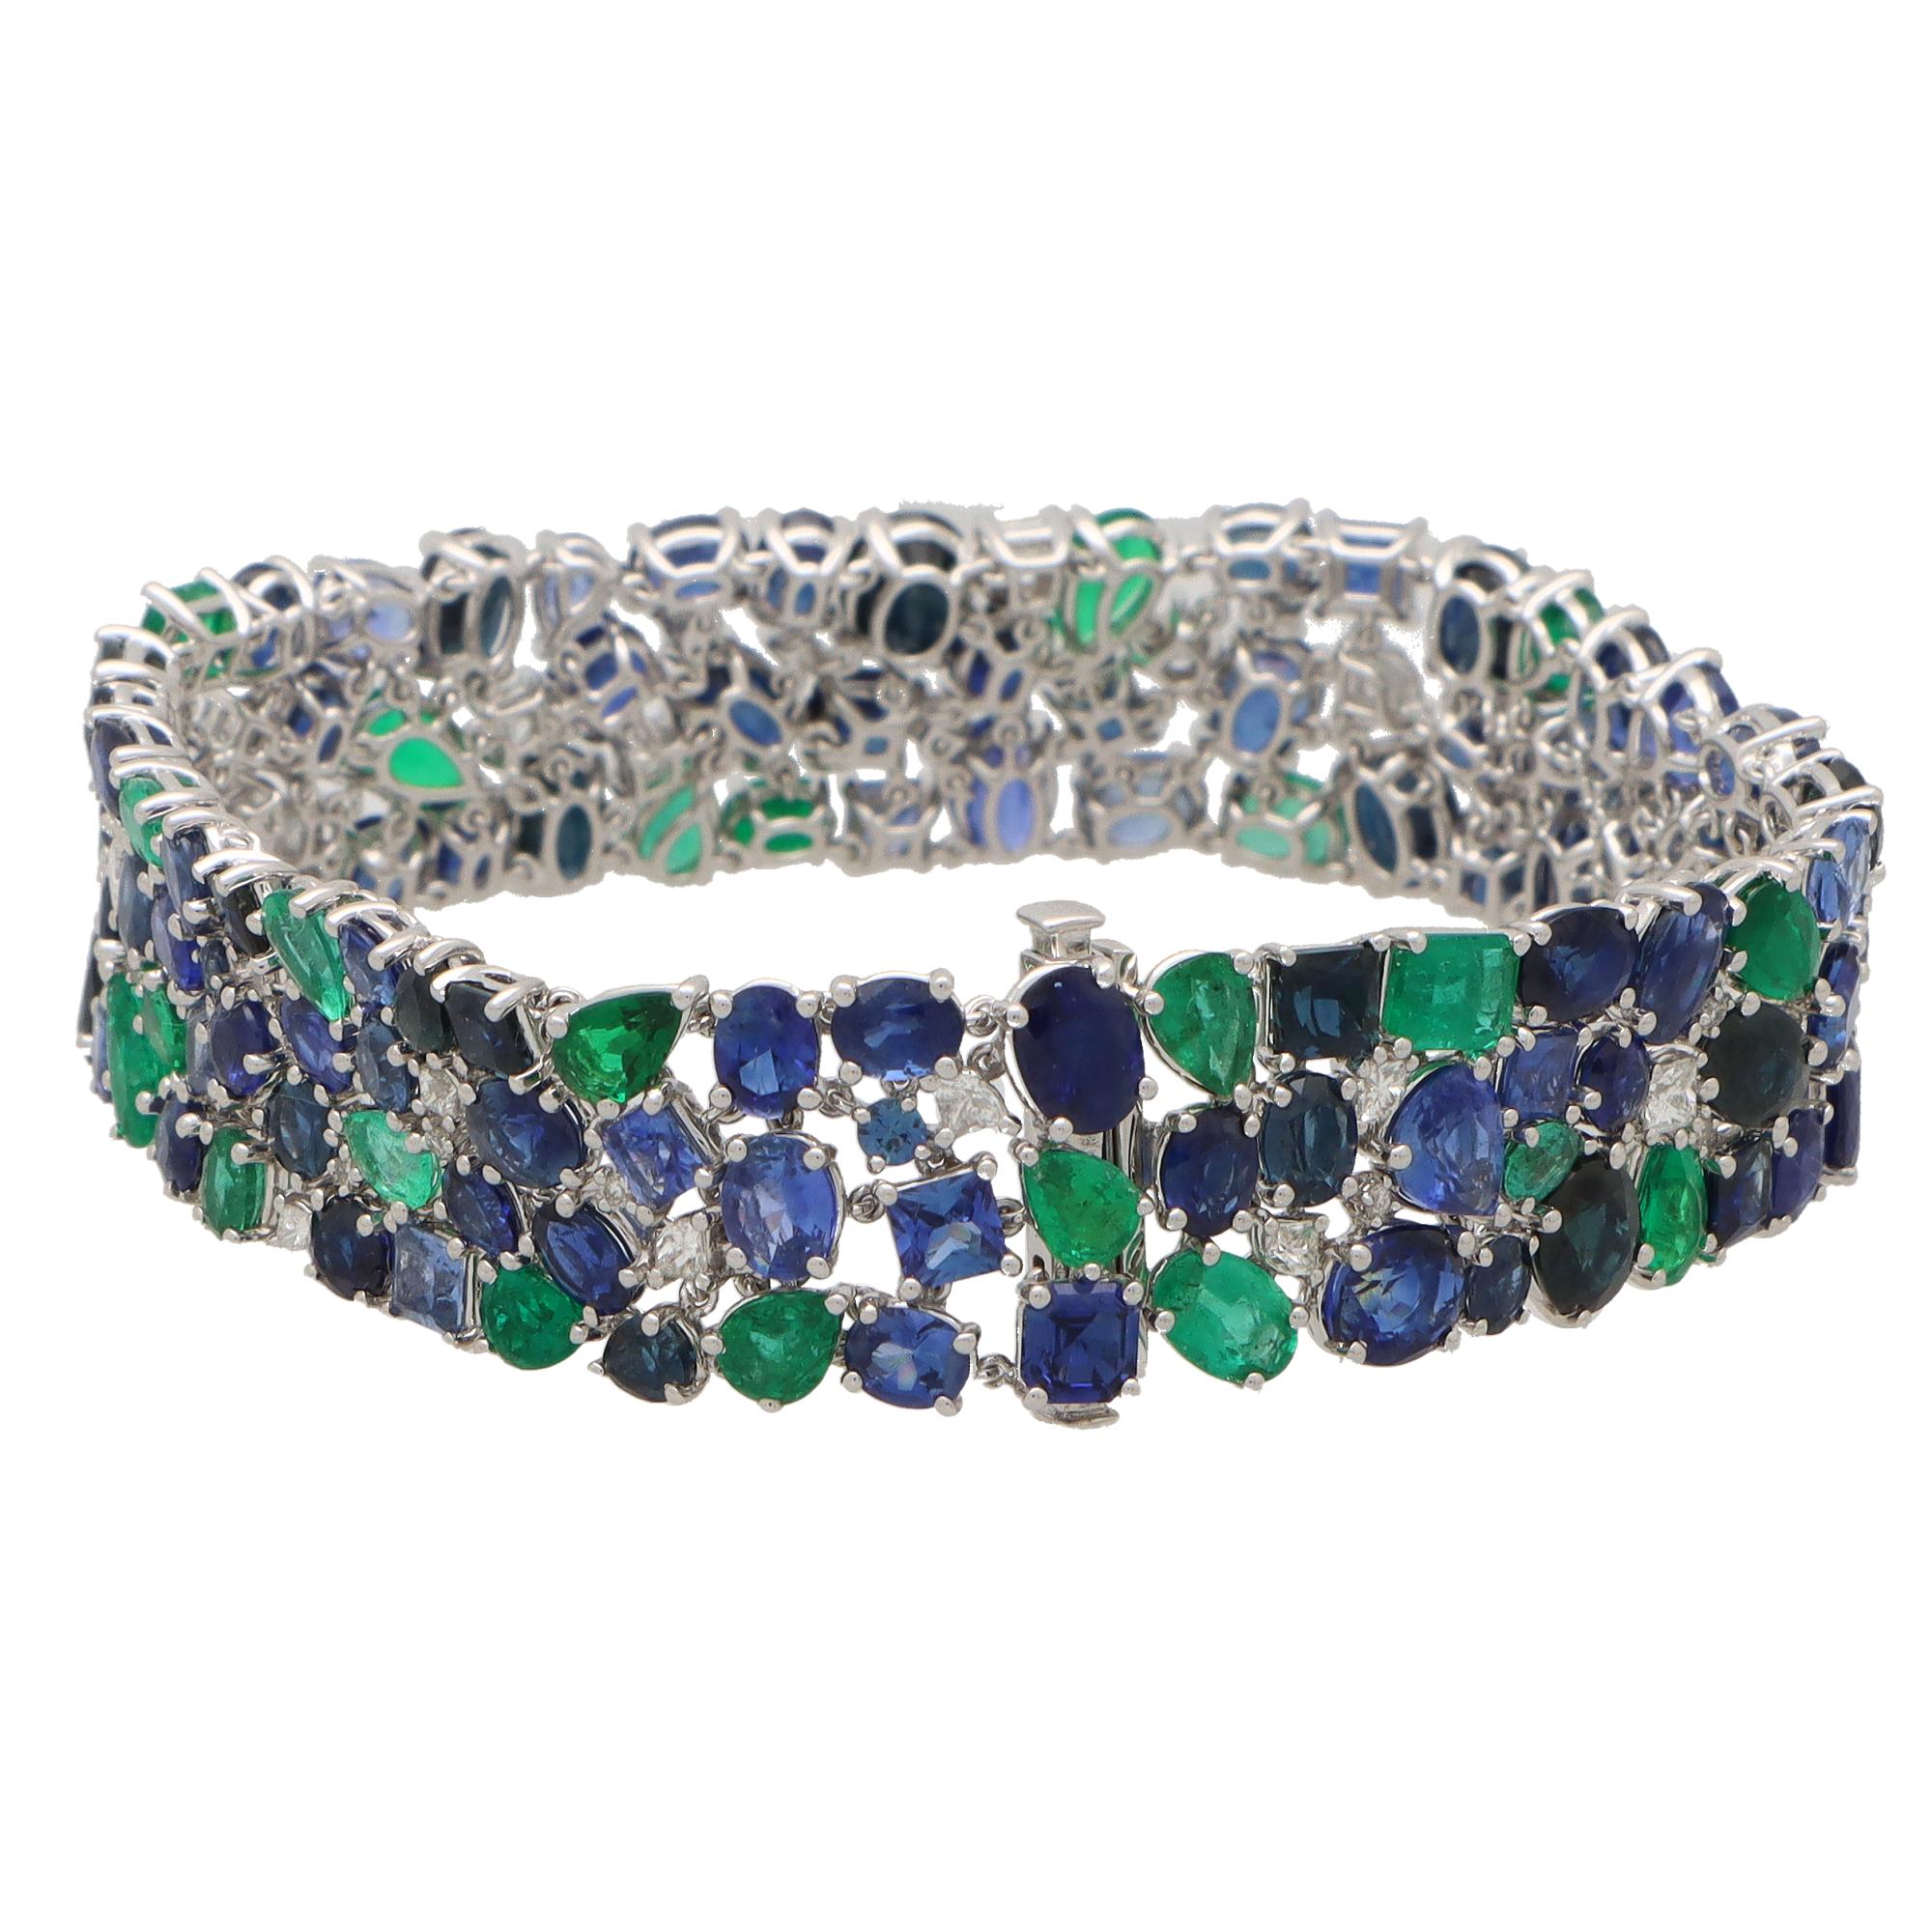 Women's or Men's Contemporary Blue Sapphire, Emerald and Diamond Bracelet Set in 18k White Gold For Sale